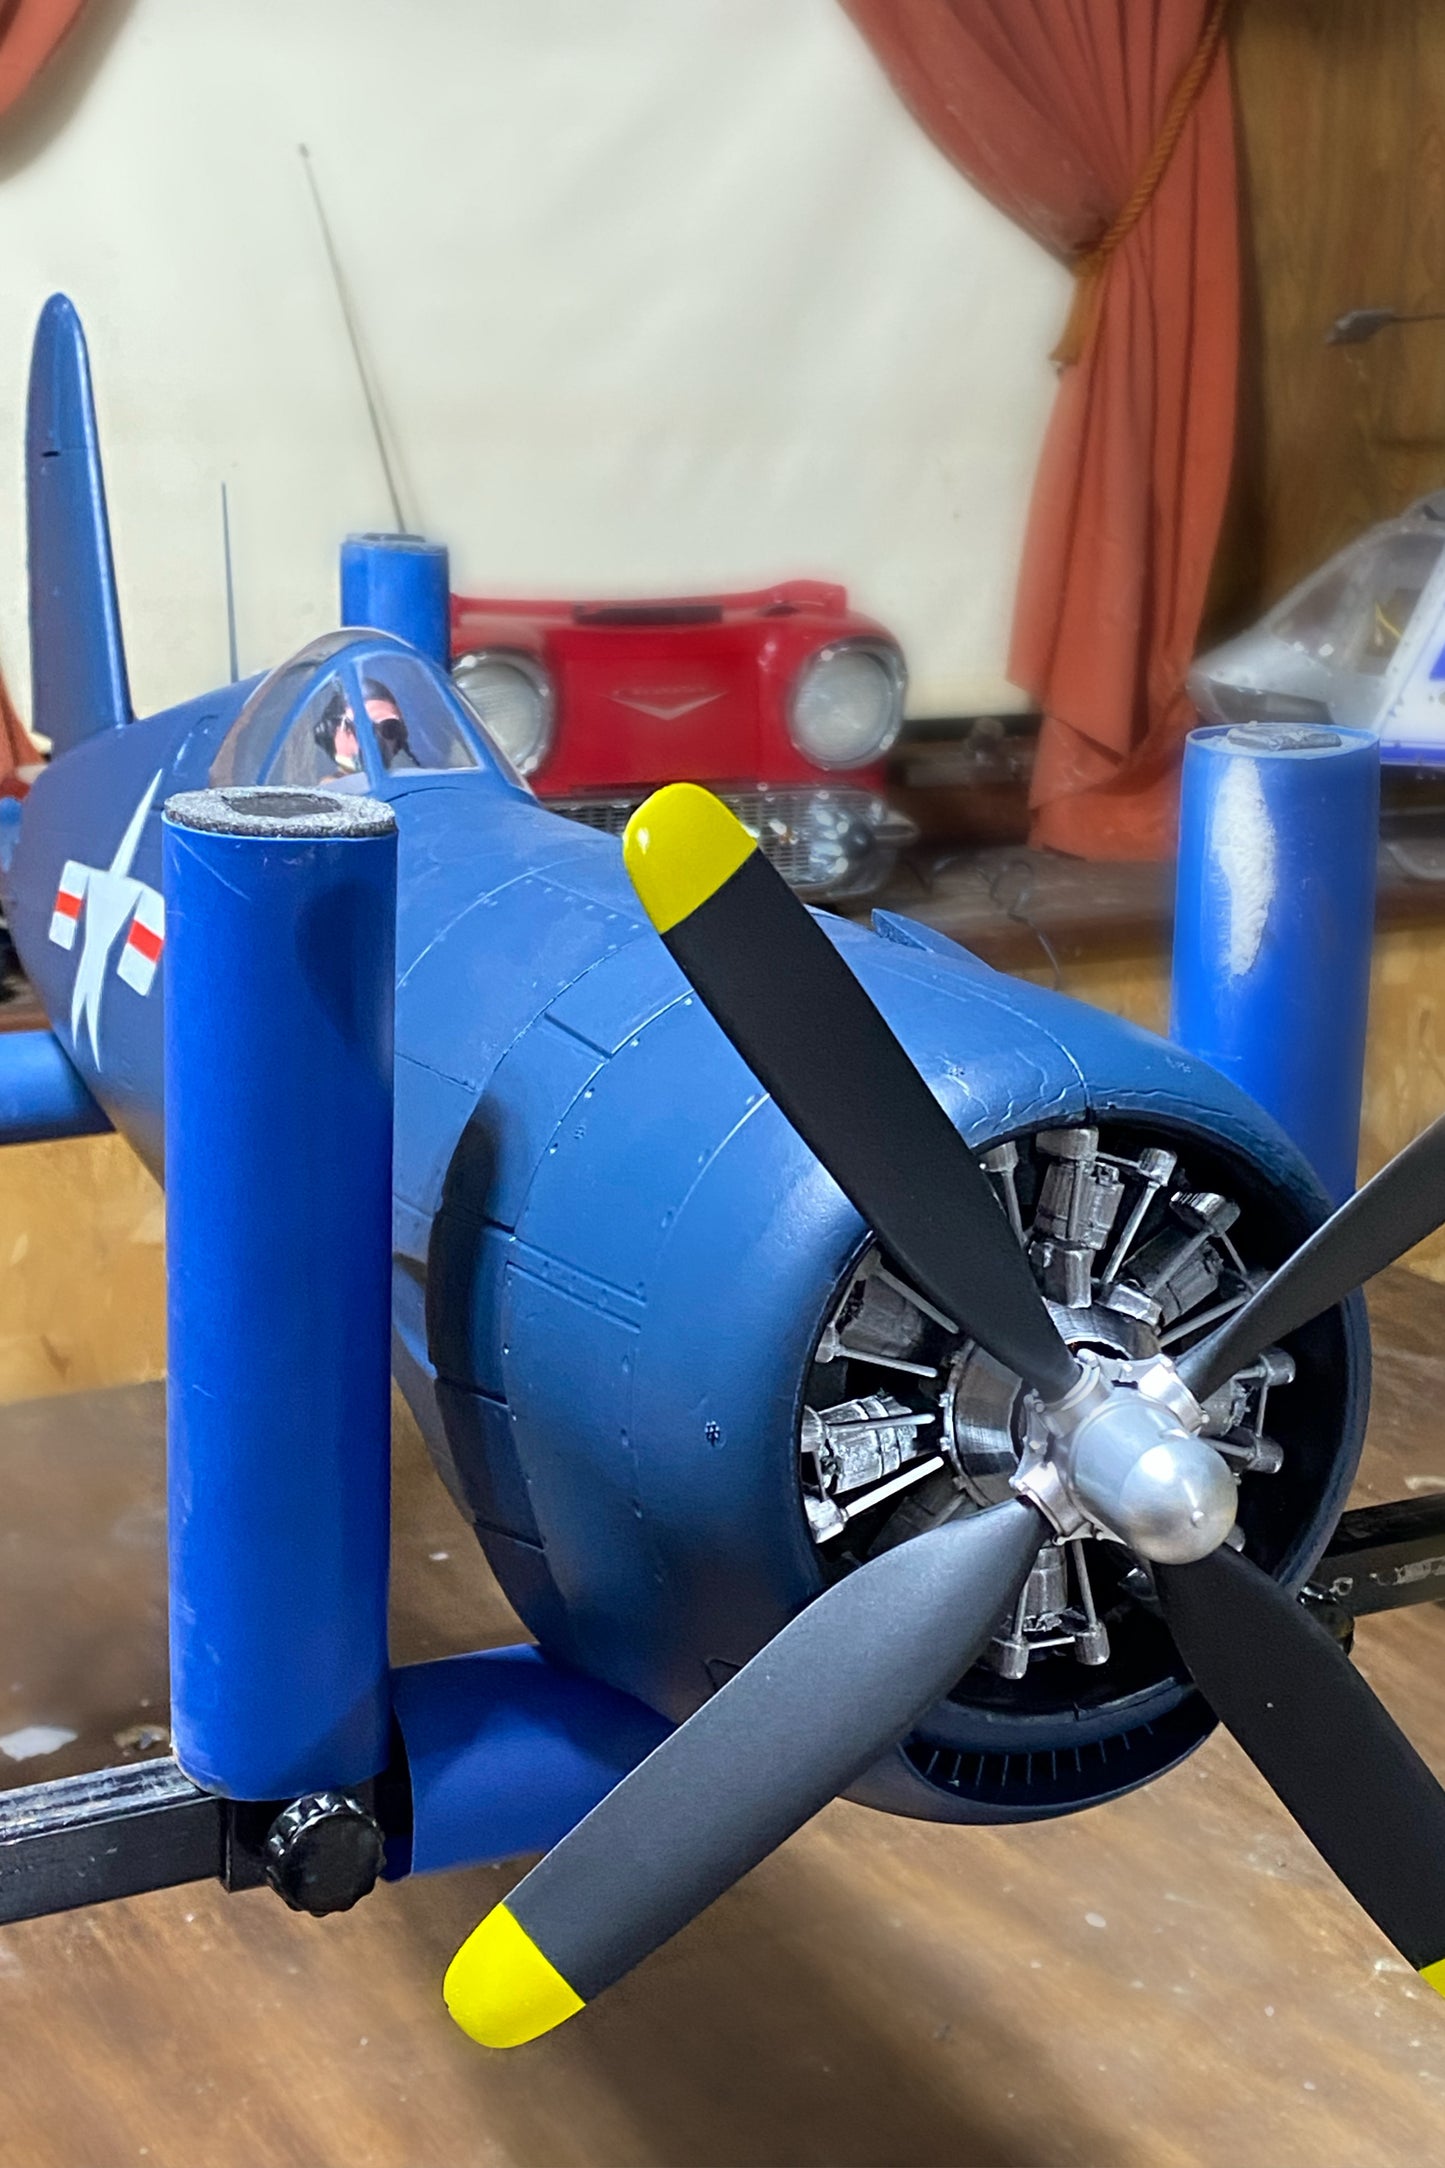 Corsair E-flite 1.2m Upgraded Direct Fit Dummy Radial Engine